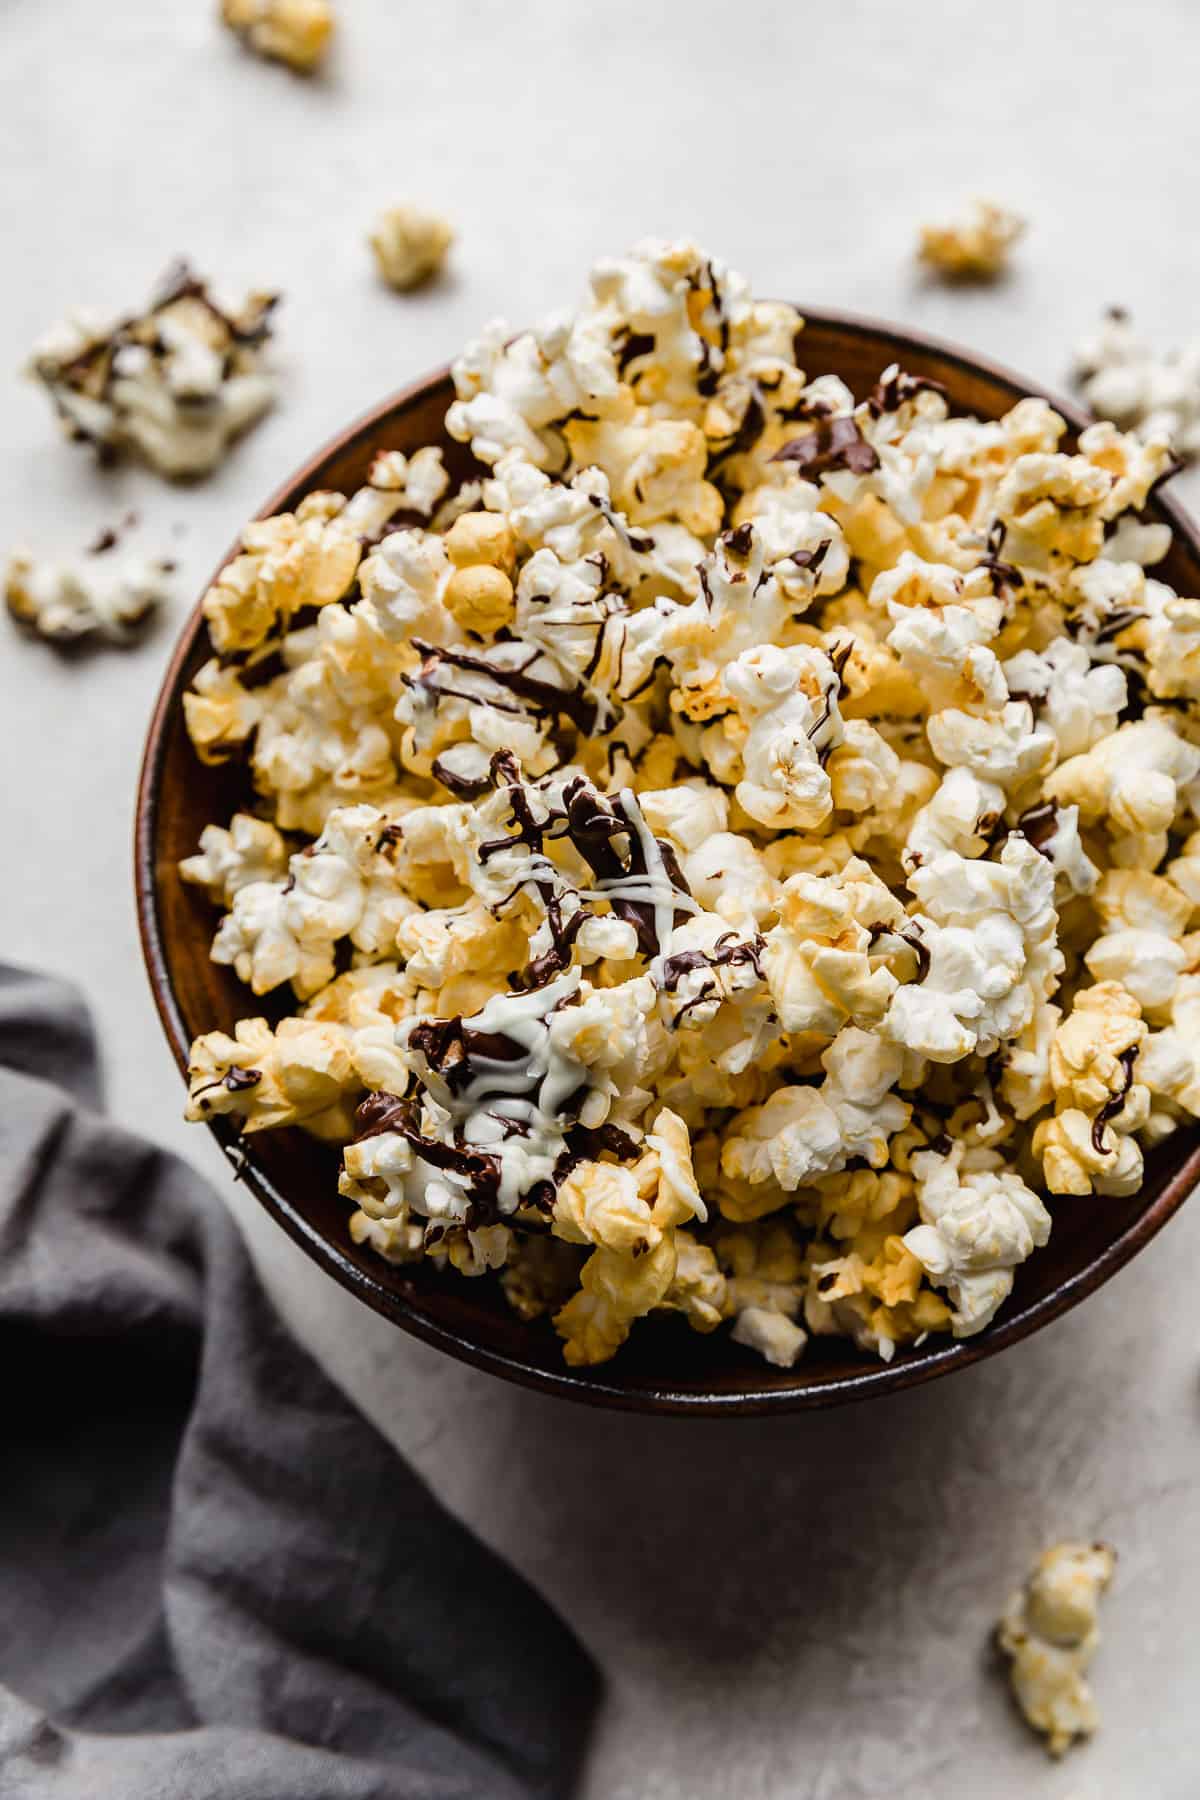 Chocolate Drizzled Popcorn in a bowl.